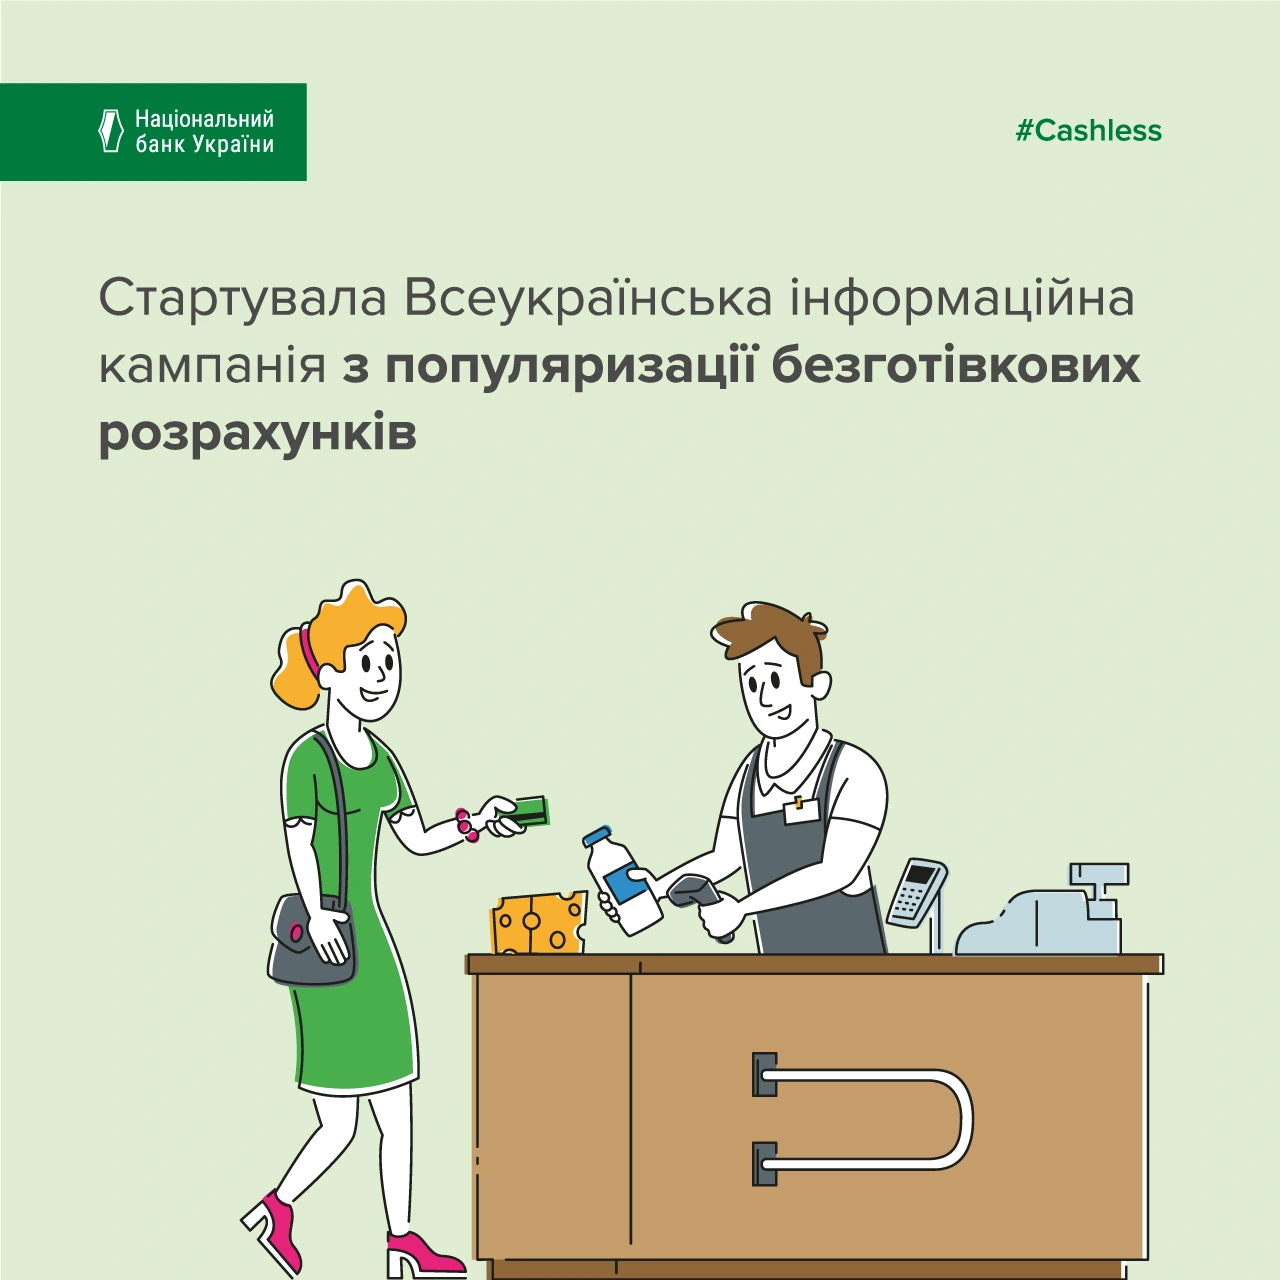 An all-Ukrainian information campaign to promote non-cash payments 